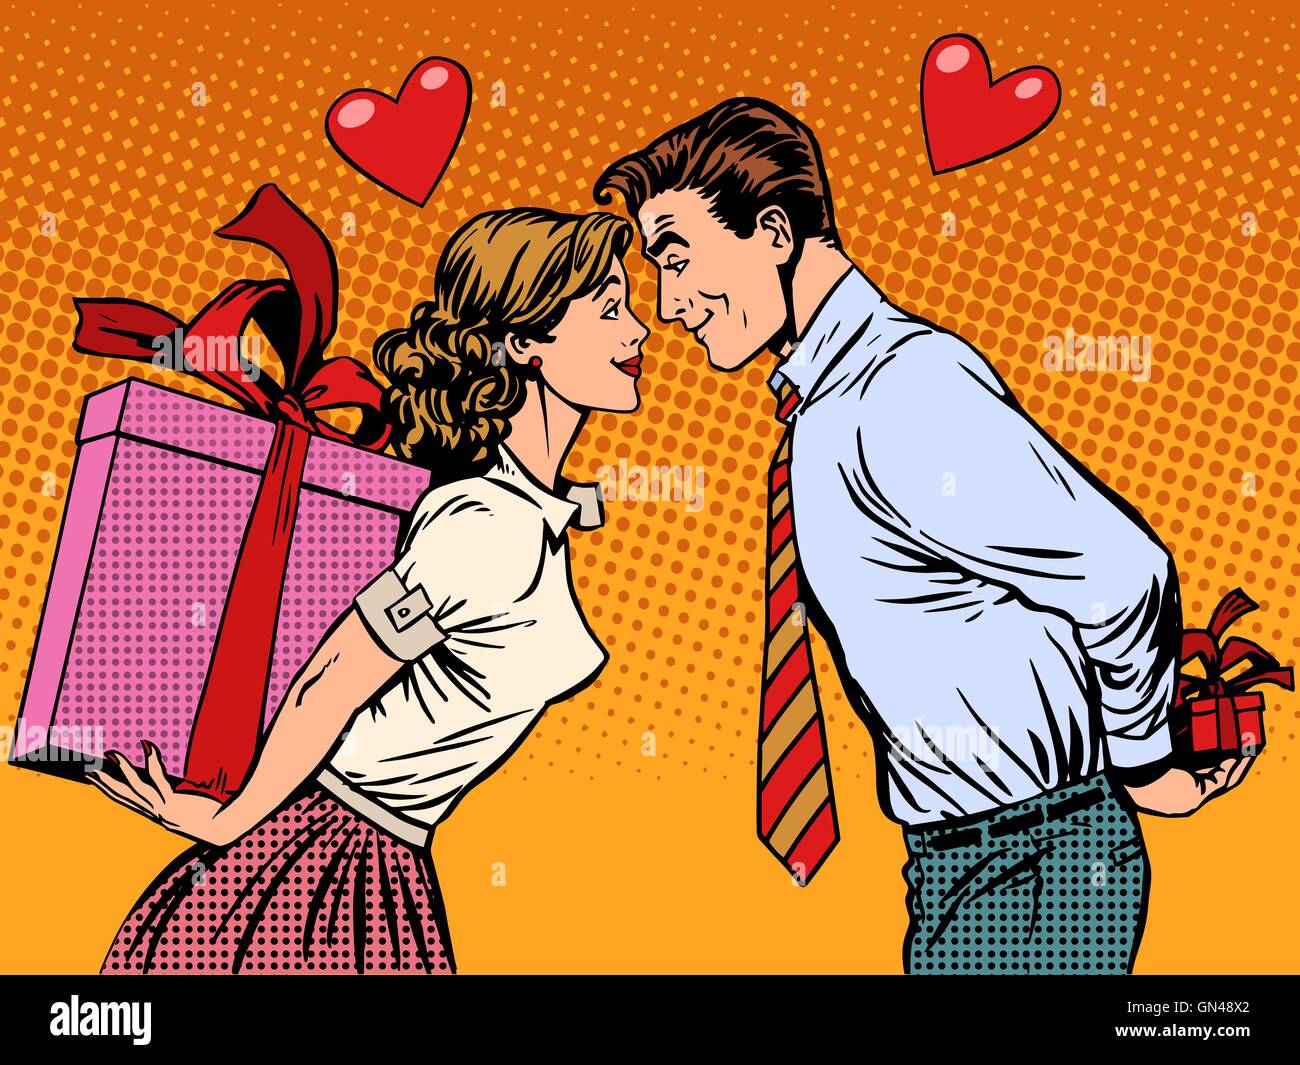 Valentine day gifts Stock Vector Images - Alamy